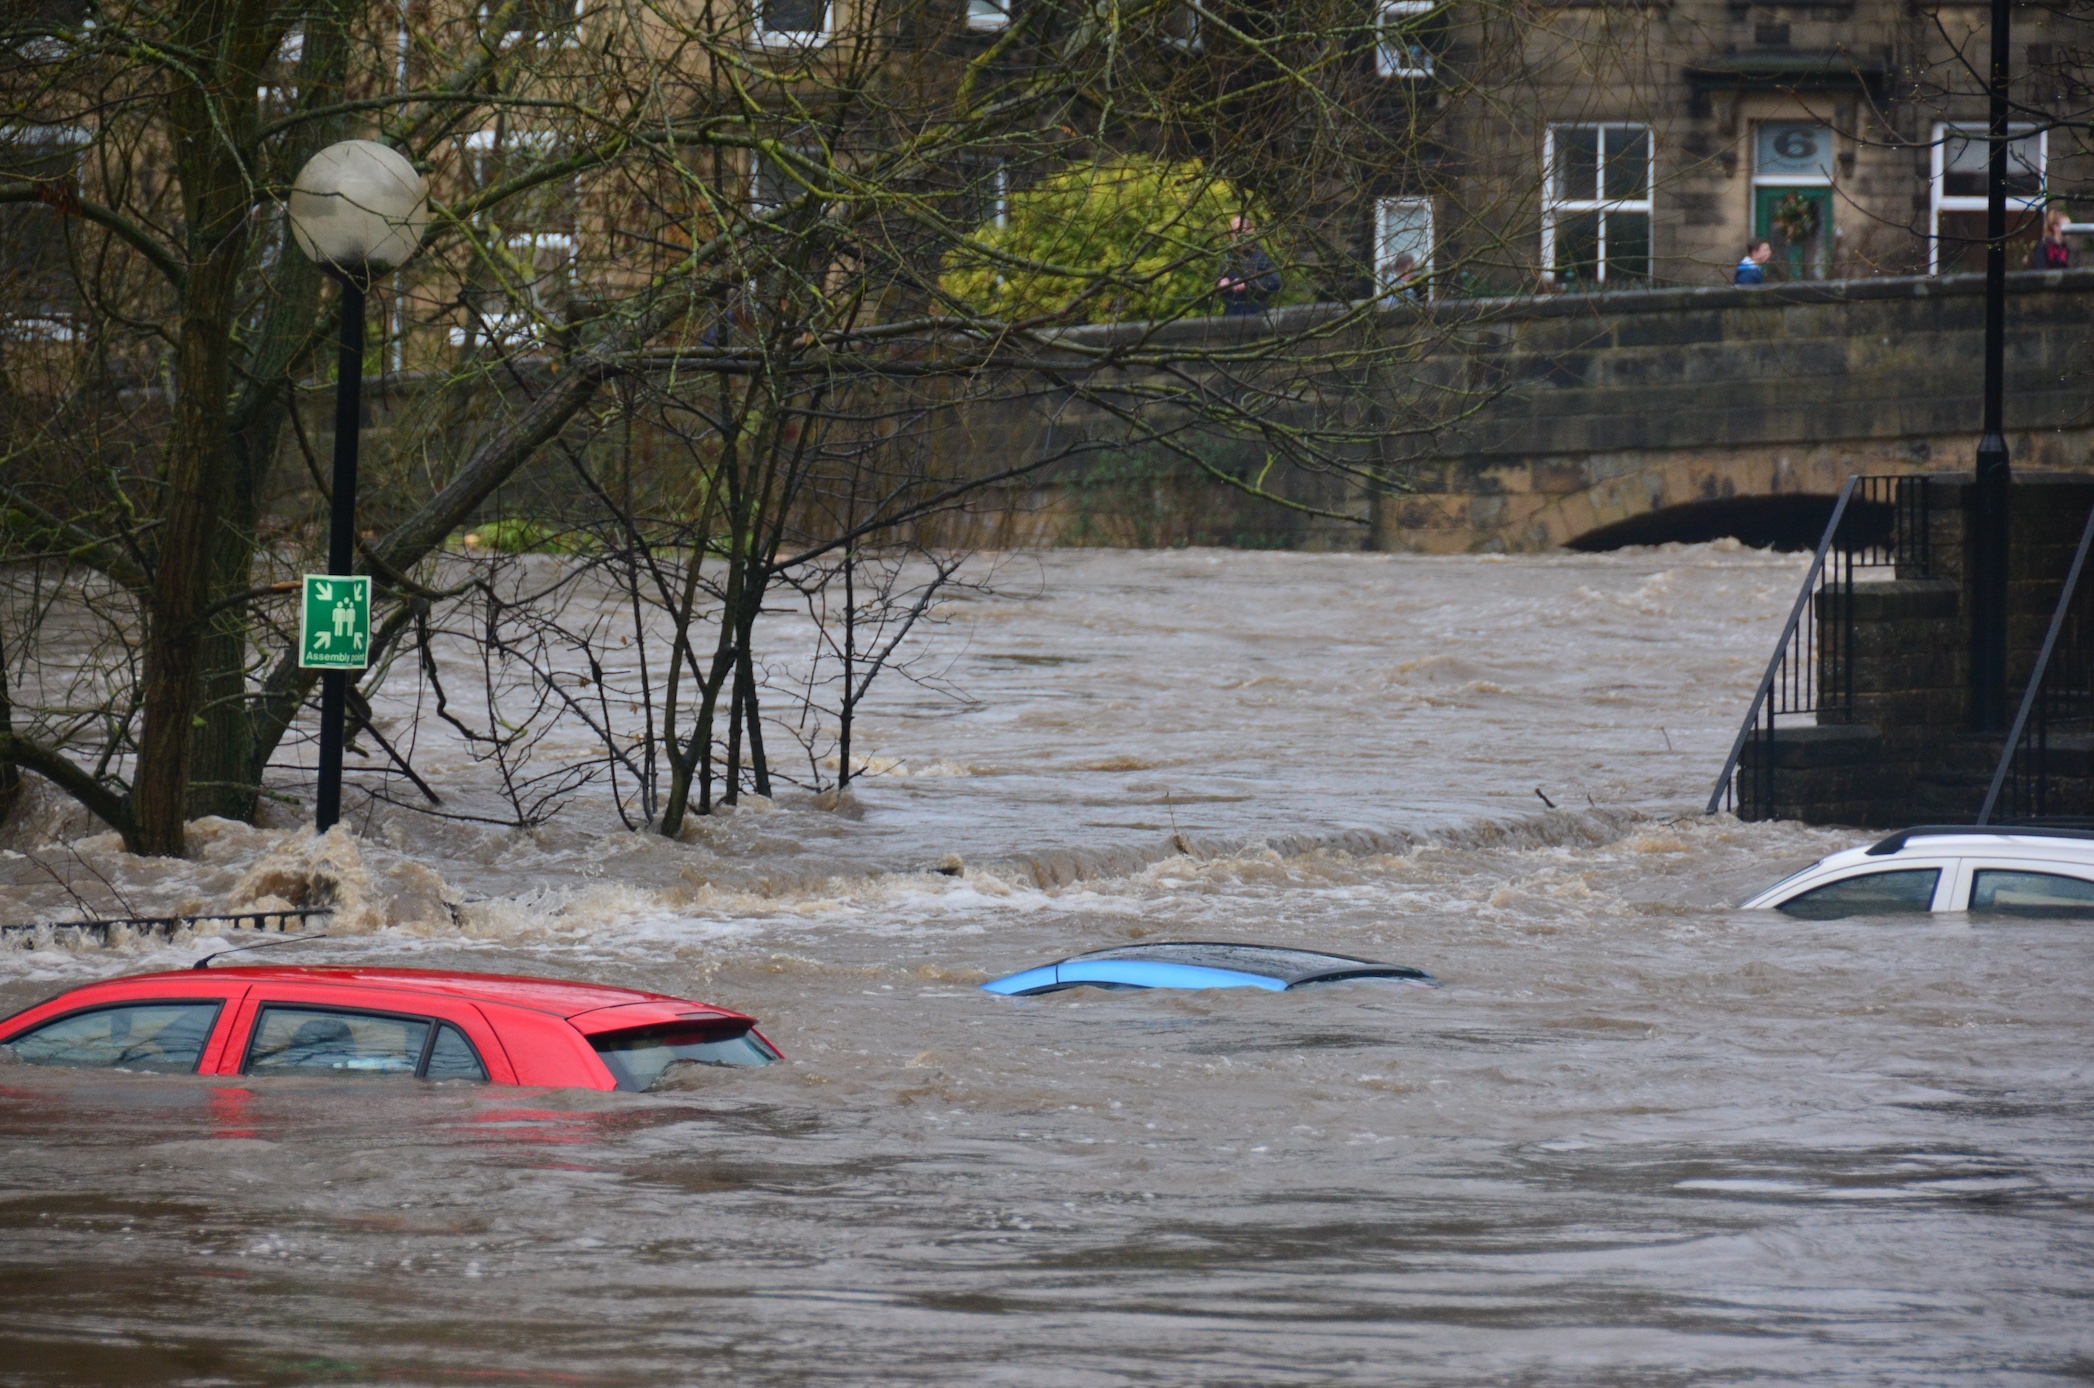 Three cars submerged in flood waters; image by Chris Gallagher, via Unsplash.com.